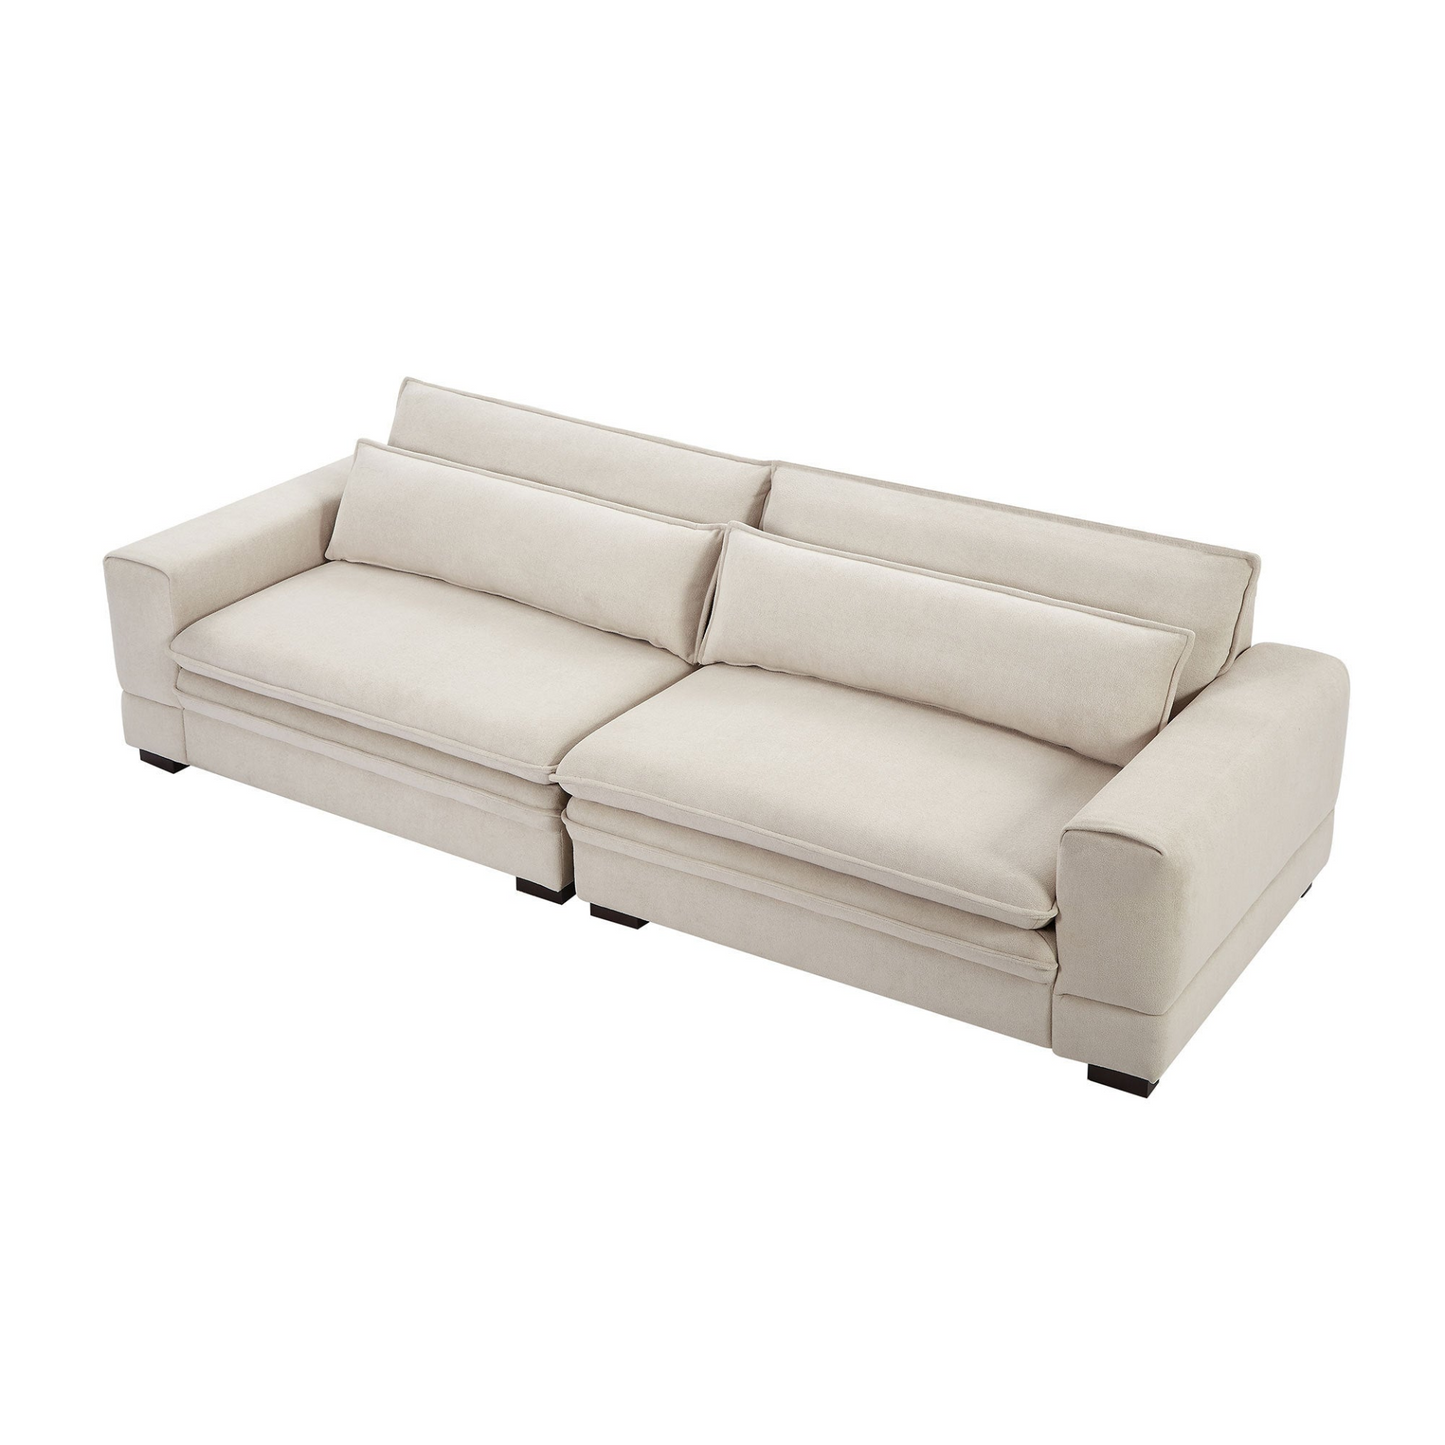 Mid-Century Sofa Couch Modern Upholstered Couch for Livingroom,Bedroom, Apartment, Home Office Beige, Goodies N Stuff